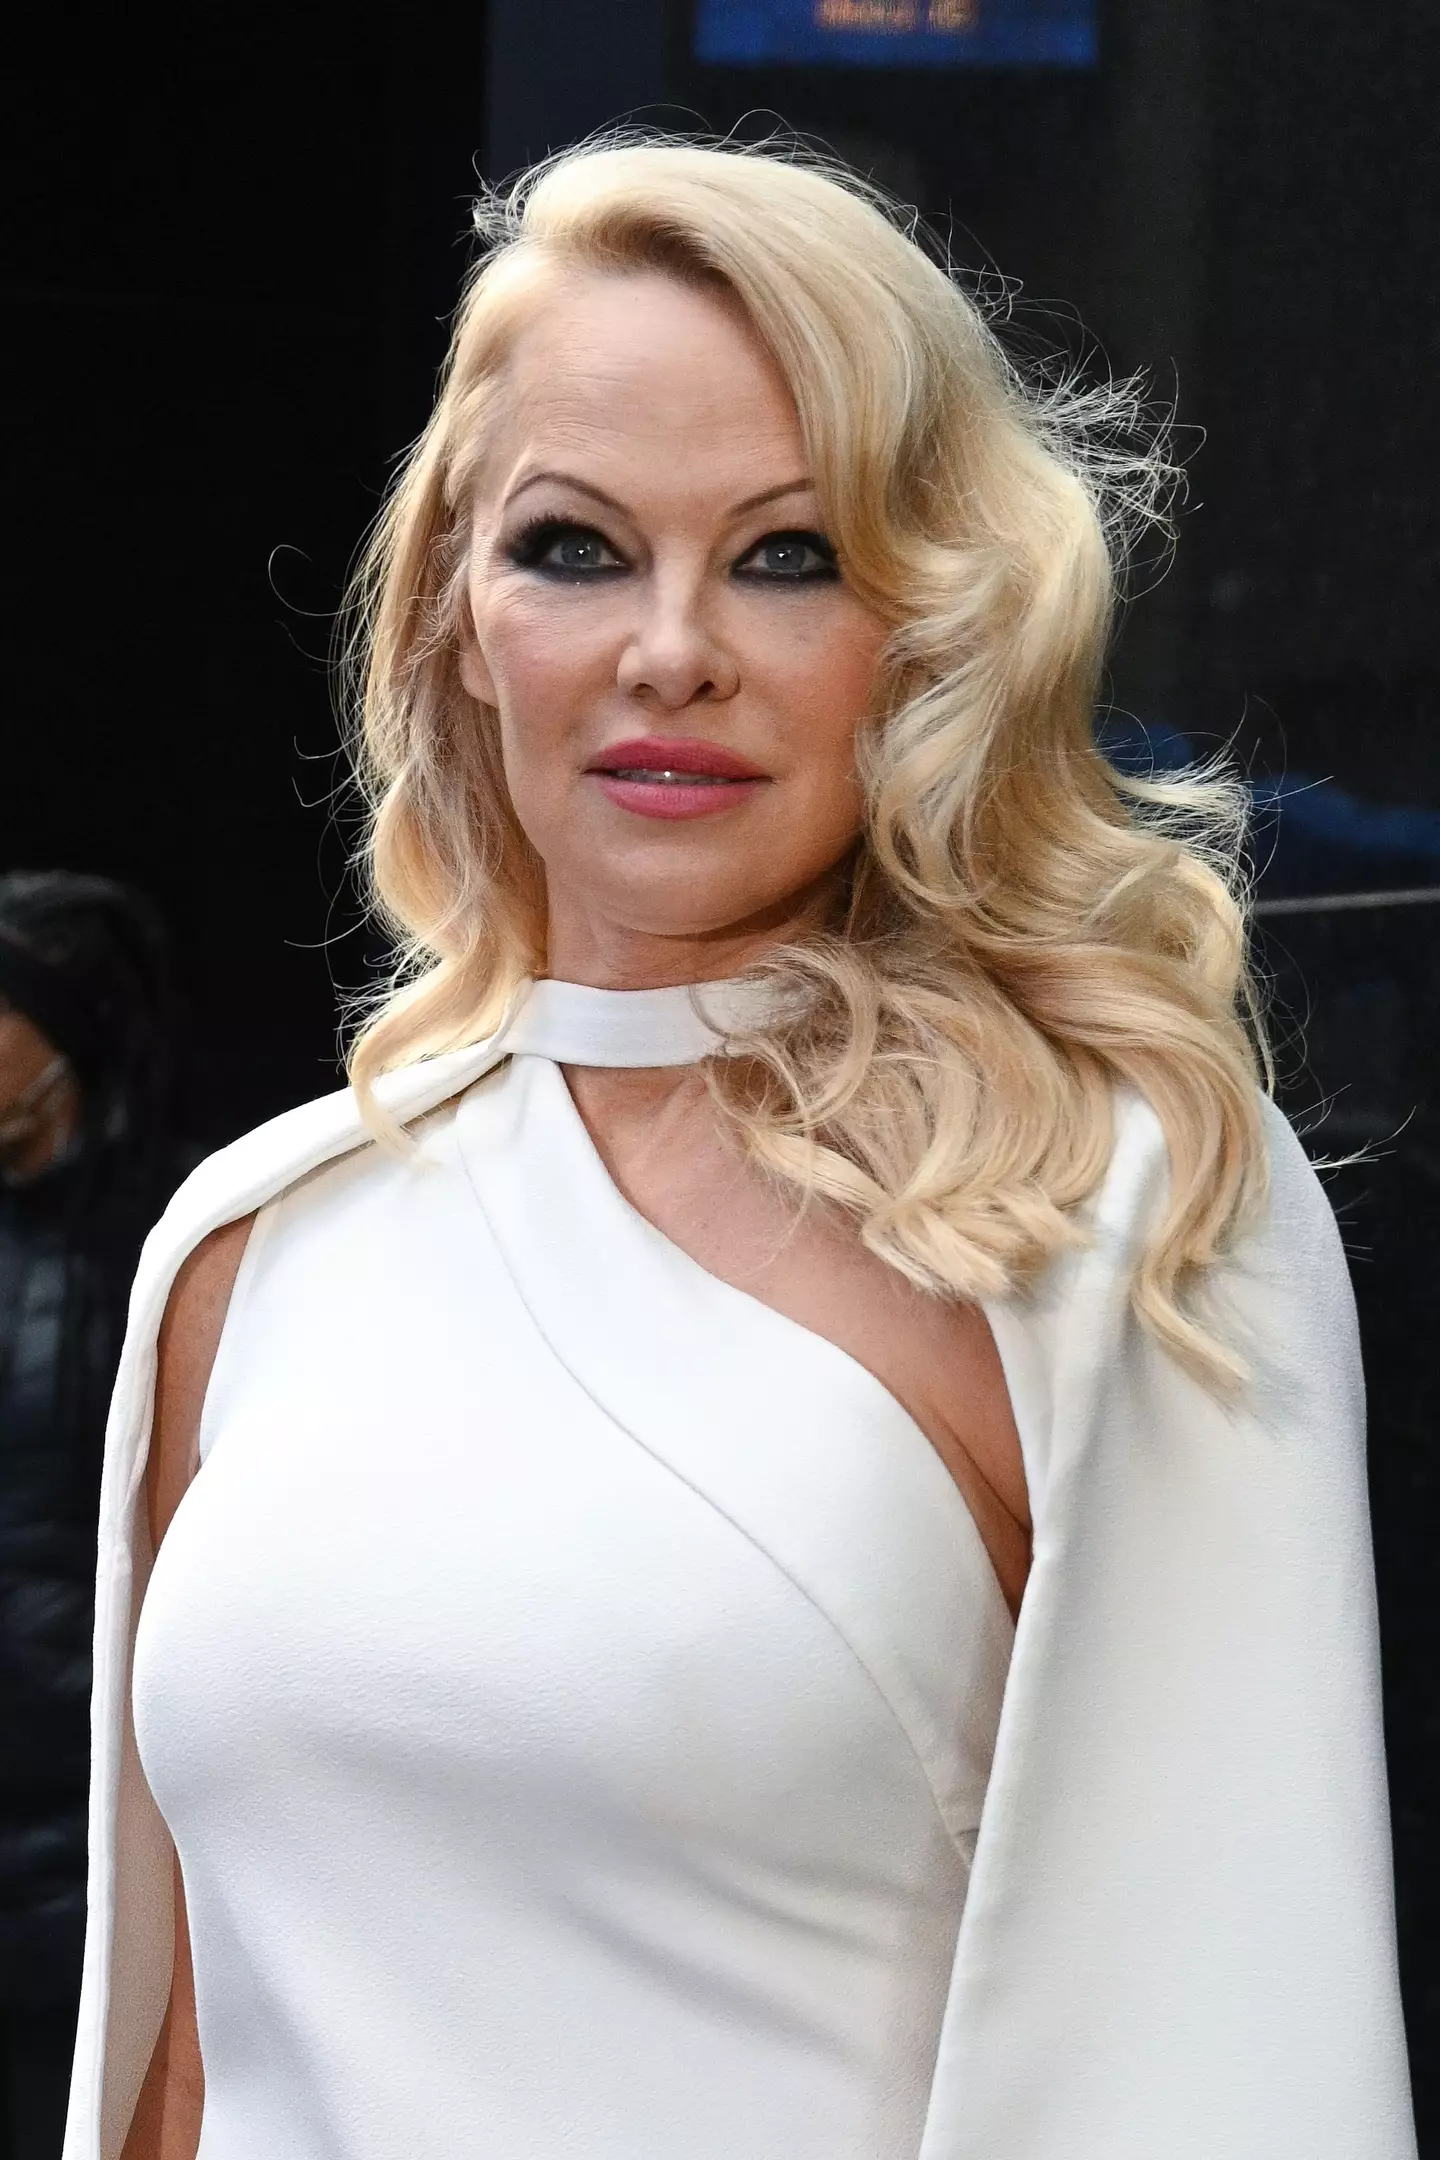 Pamela Anderson doubled down on her claims in a separate interview.